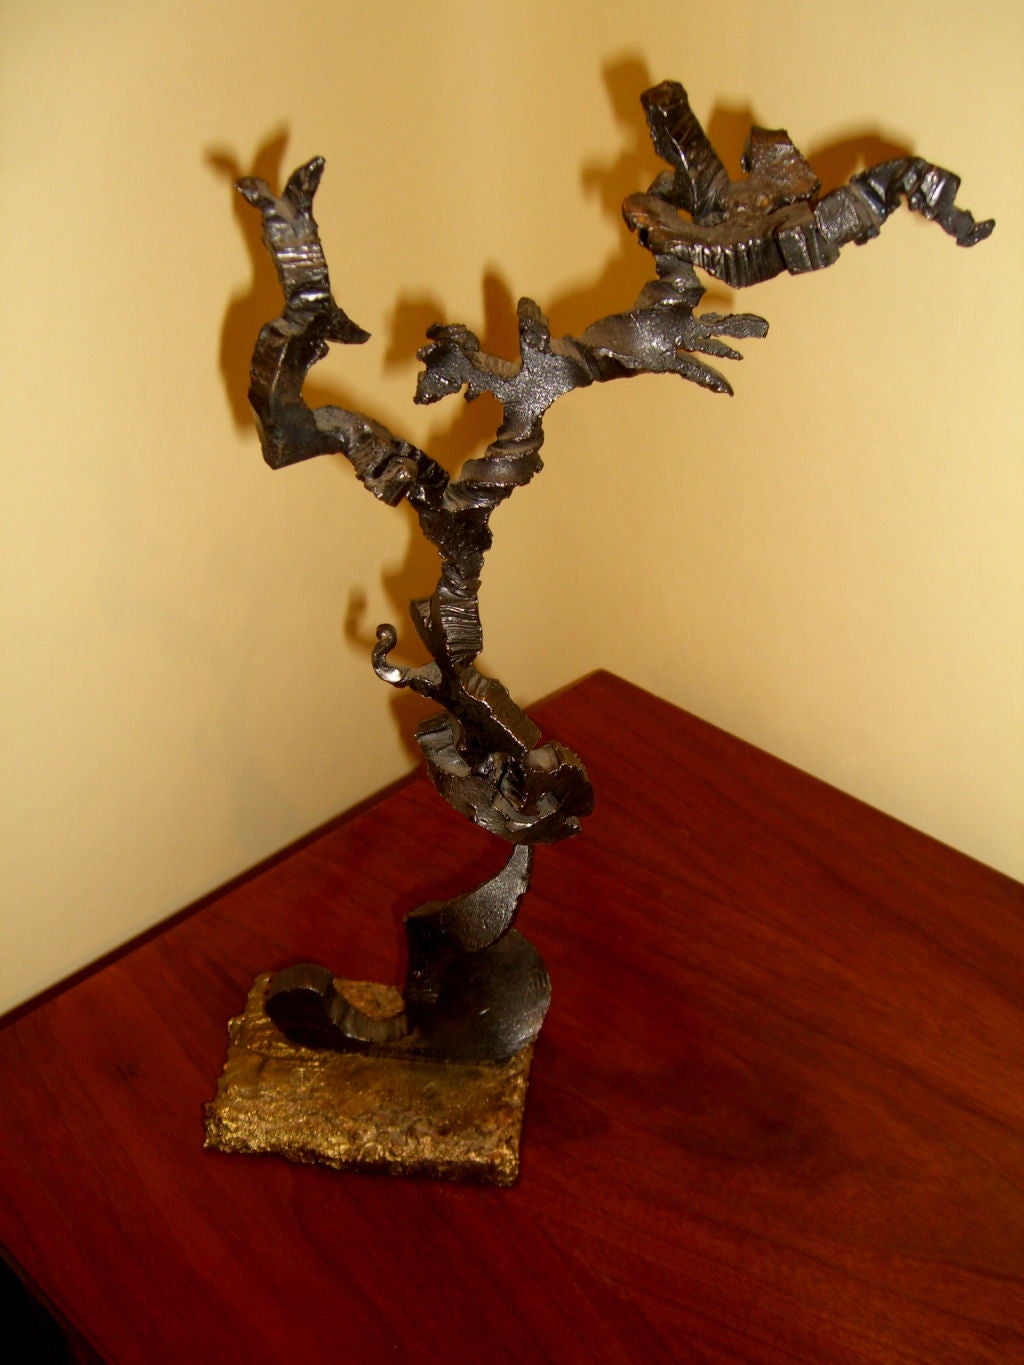 A nice Iron and Bronze abstract sculpture by Karl Fischer. Karl Fischer was a talented art blacksmith who made a career out of fashioning hunks of unassuming metal into critically-acclaimed sculptures, furniture and other handcrafted objets